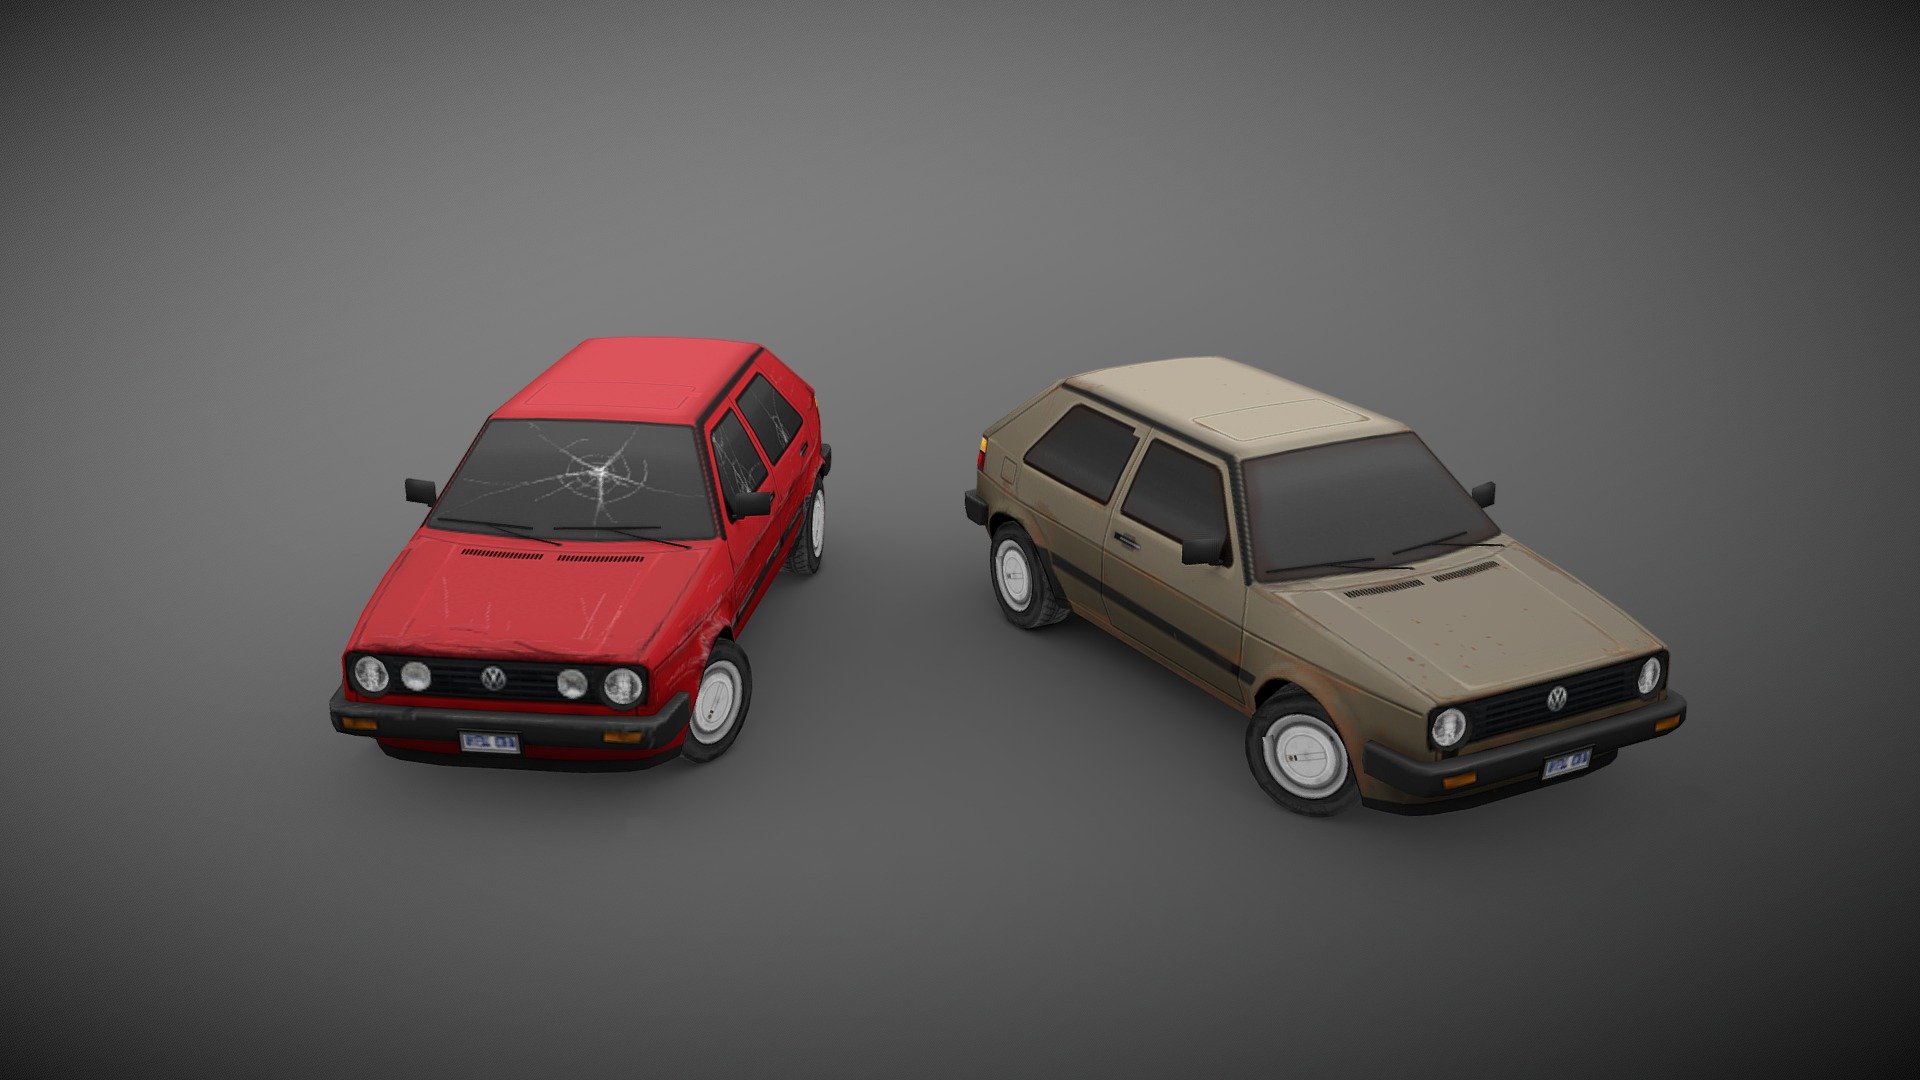 Showcase of a 1988 Volkswagen Golf Mk2 I’ve made for project ZOMBOID, low poly but with a high detail texture, optimized for game engine. This version is not a 100% true to the original since there are some compromises I’ve had to make to present it here.

You can find the actual version in project ZOMBOID STEAM Workshop 3d model